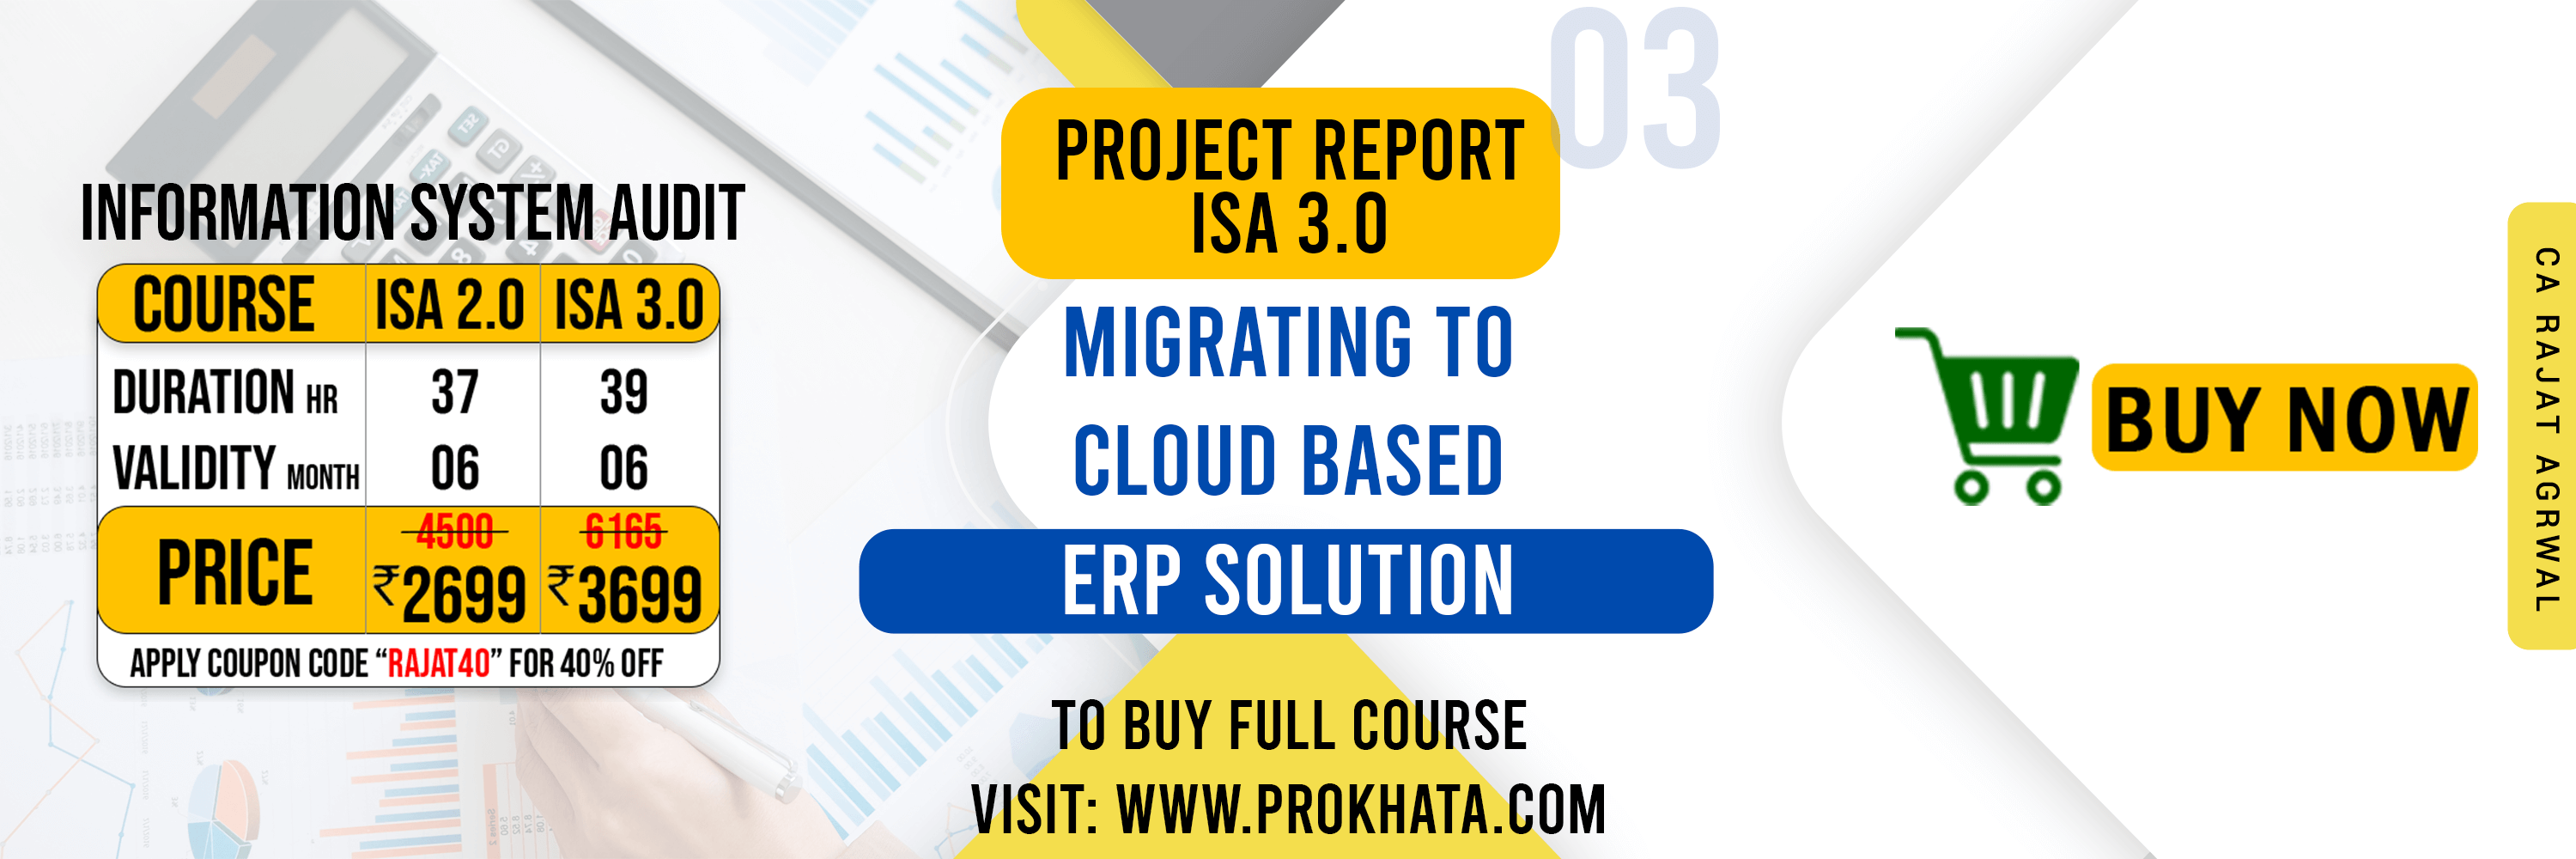 Project Report 03 Migrating to Cloud based ERP solution